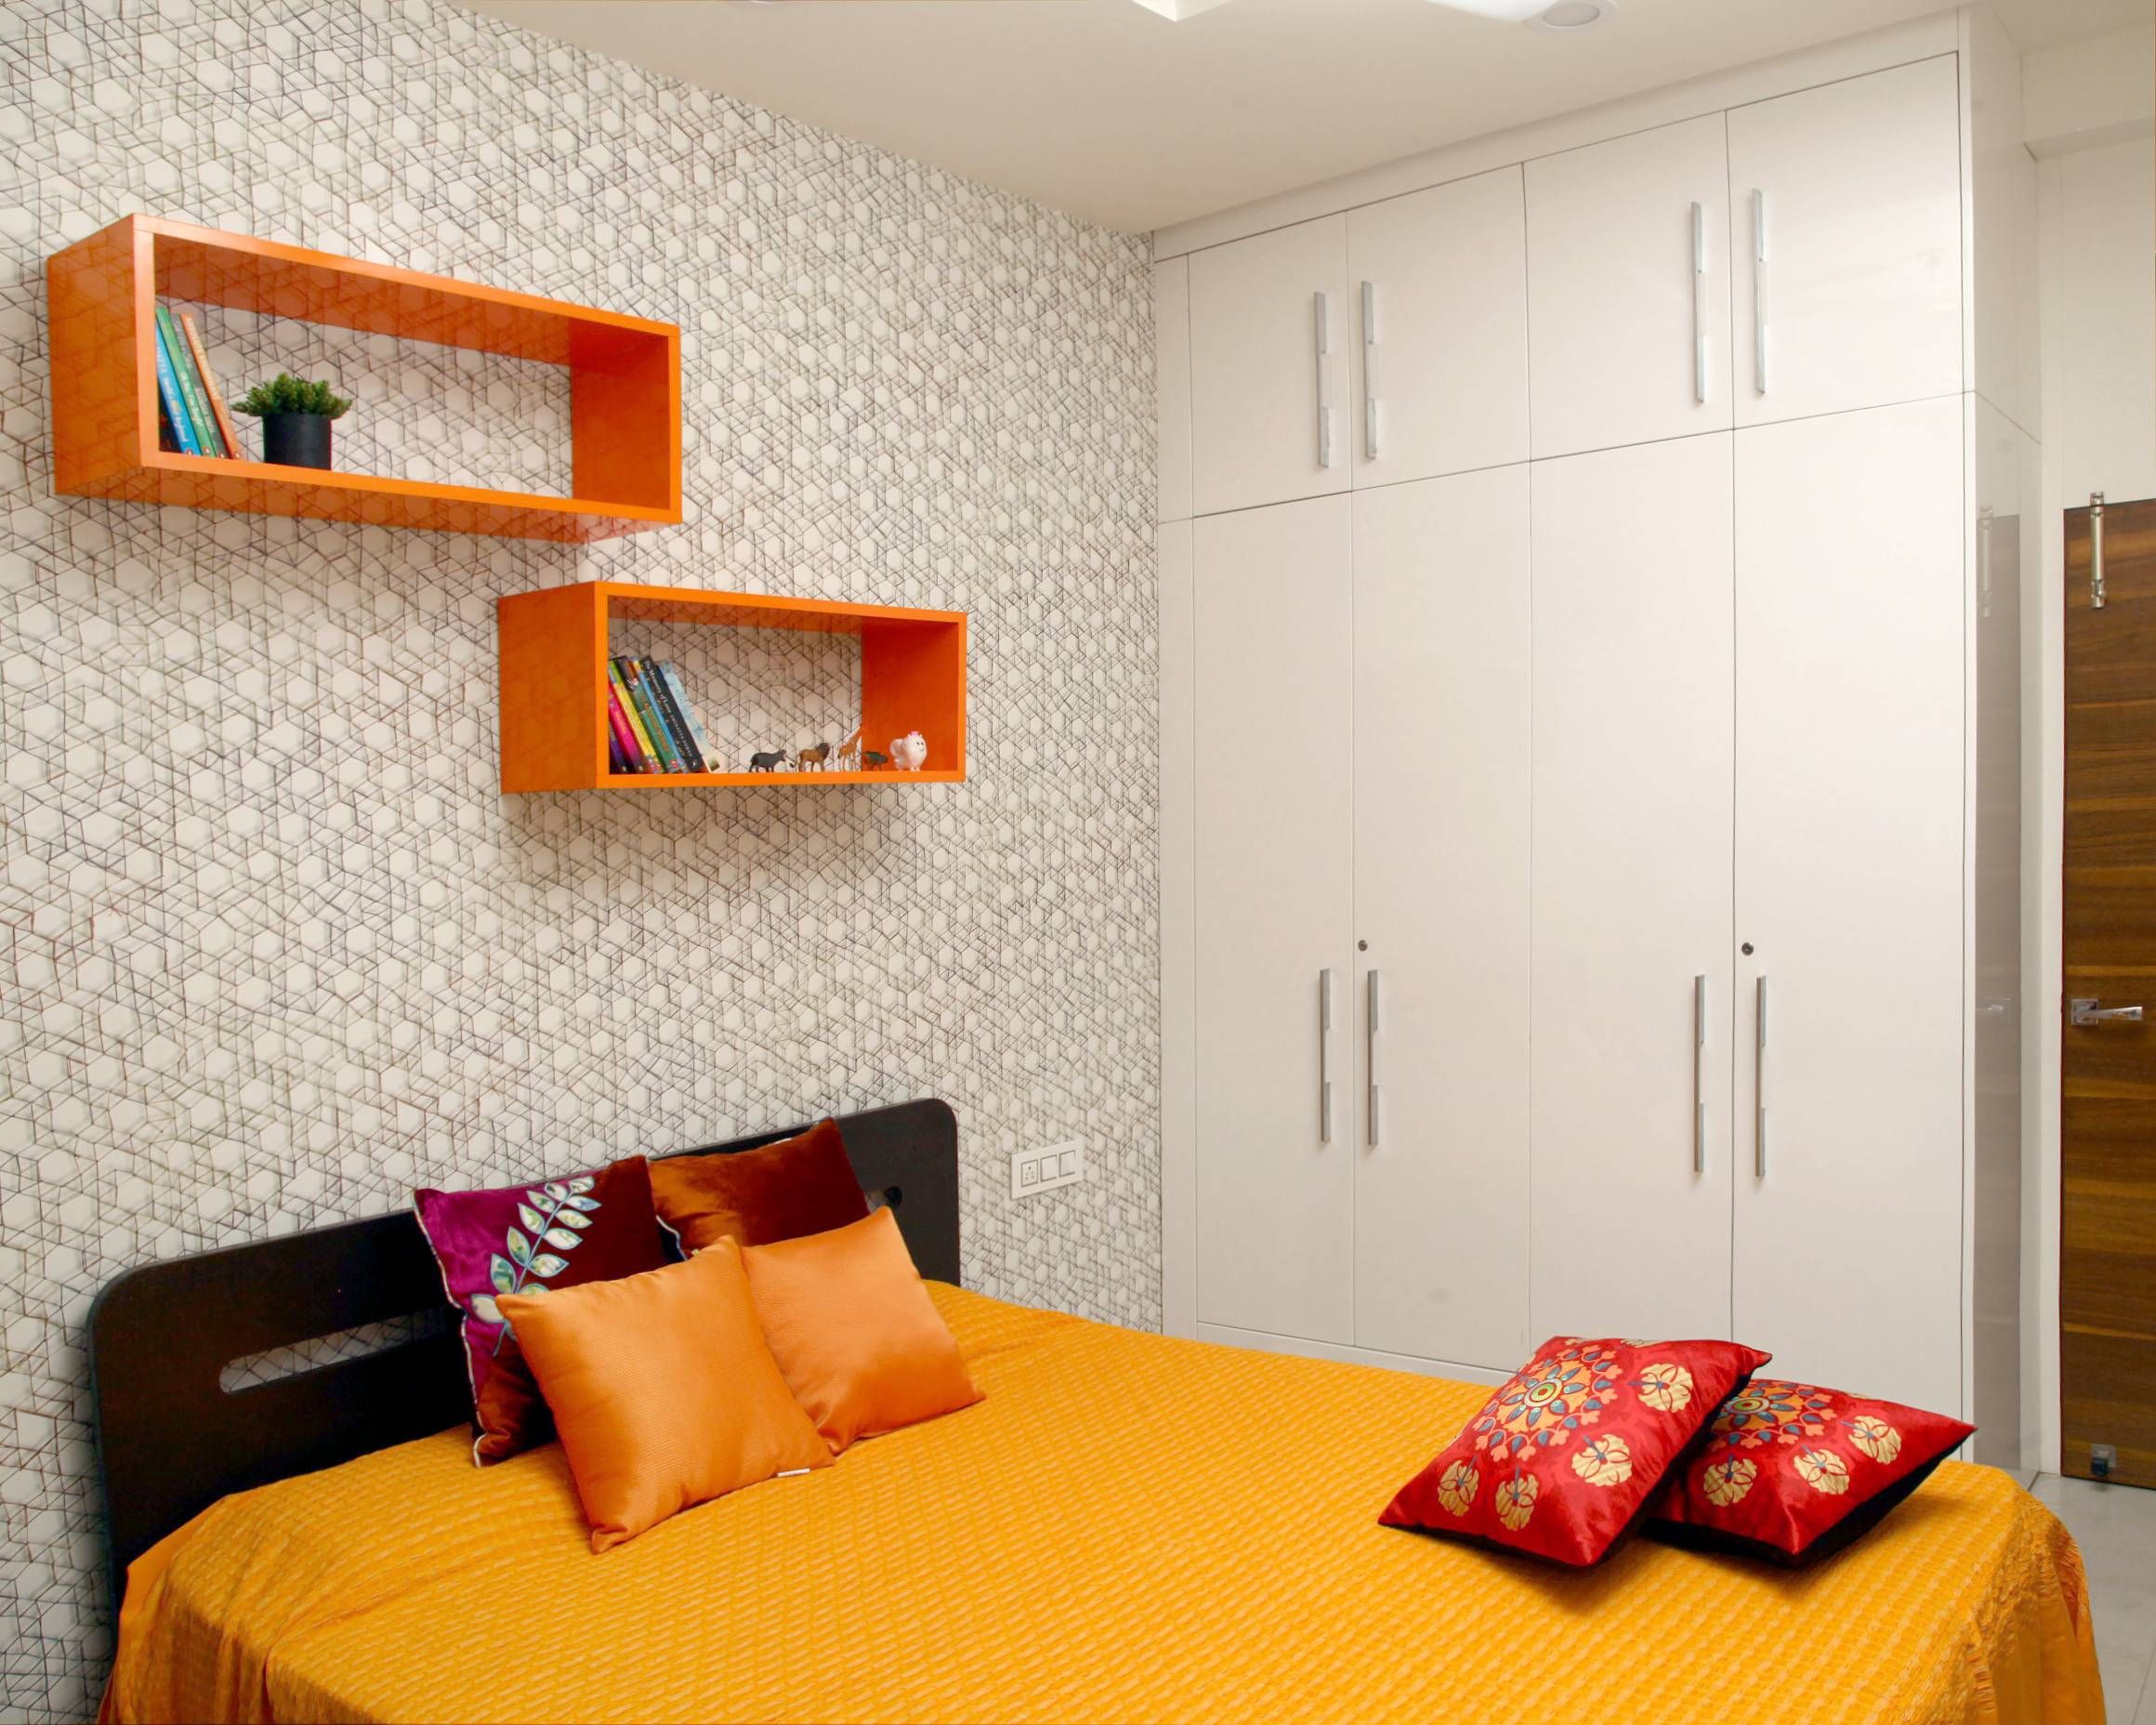 Modern Orange And Off-White Kid's Room Design With Study Table